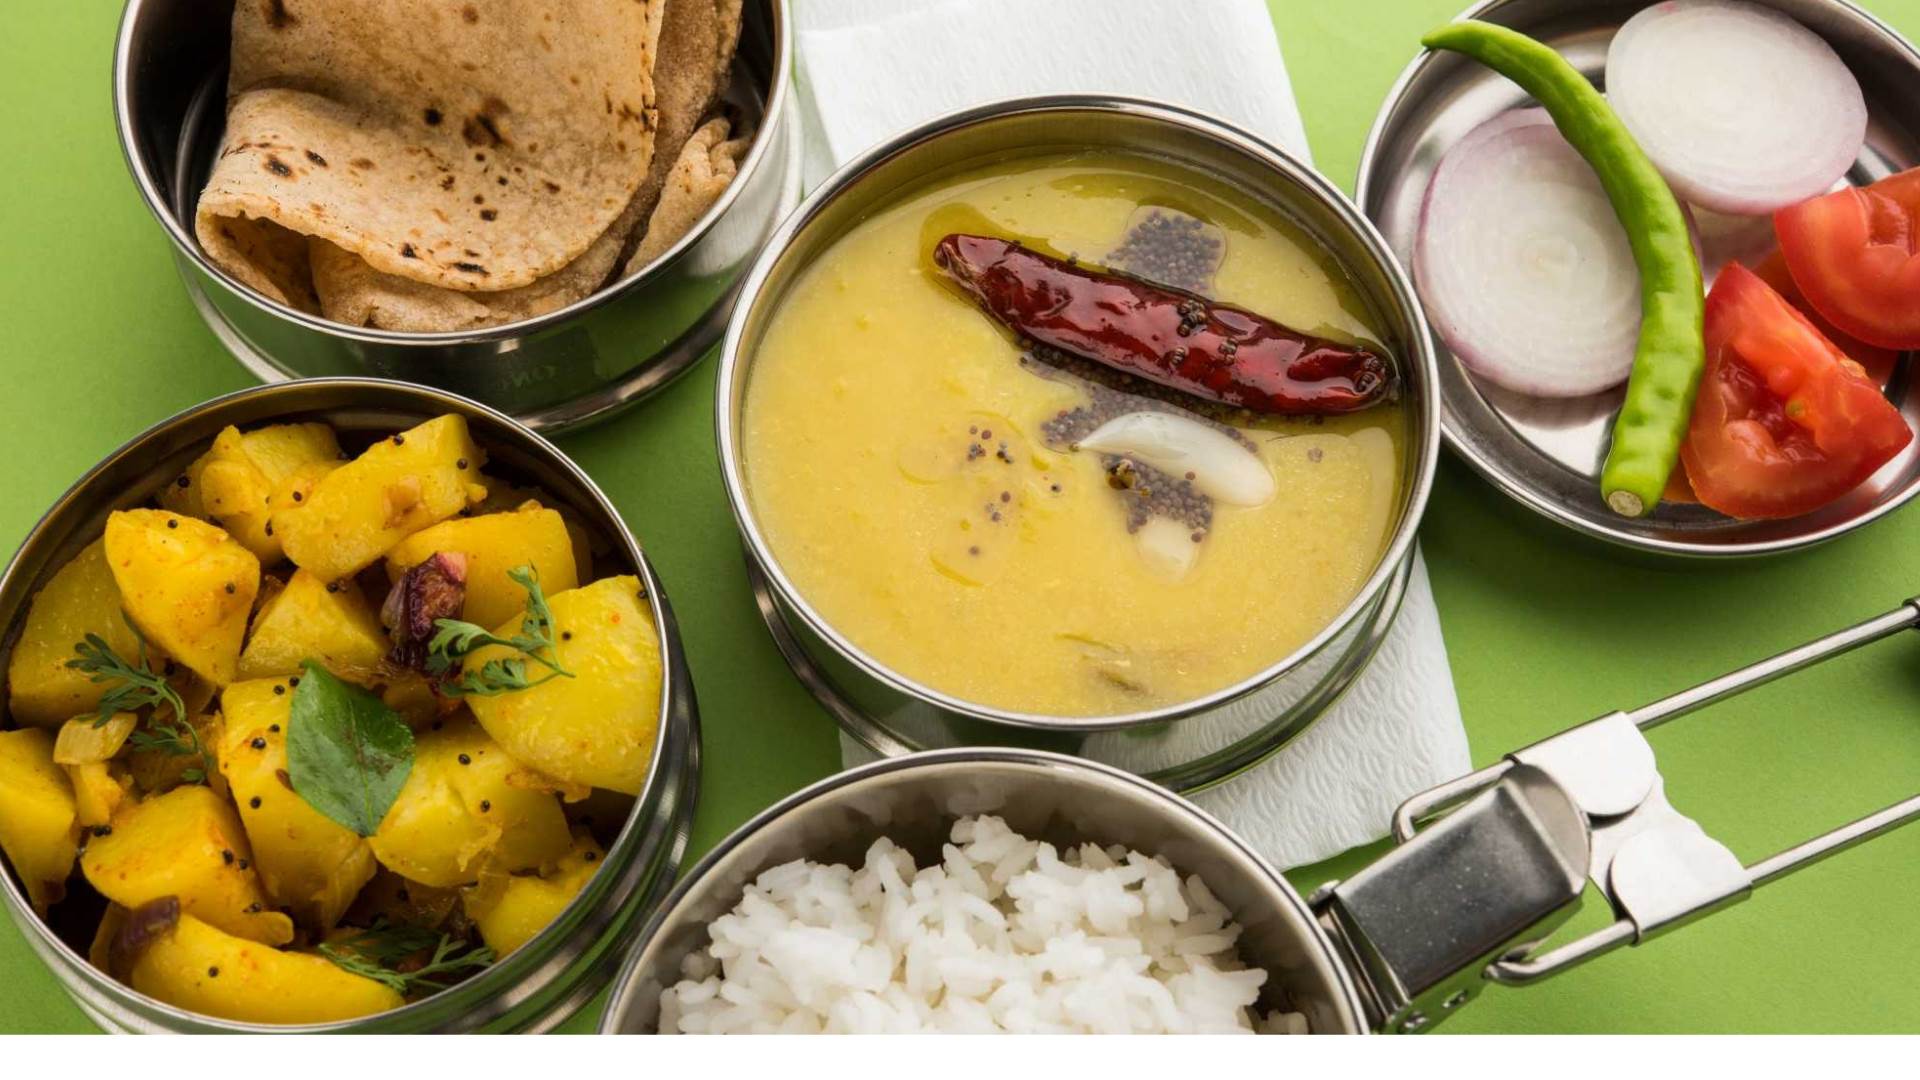 Tiffin Services in Mumbai Bhojan Tree provide their Tiiffin services across Mumbai with one special cuisine and unrepetative menu every month. https://www.bhojantree.com/tiffin-services/ by bhojantree